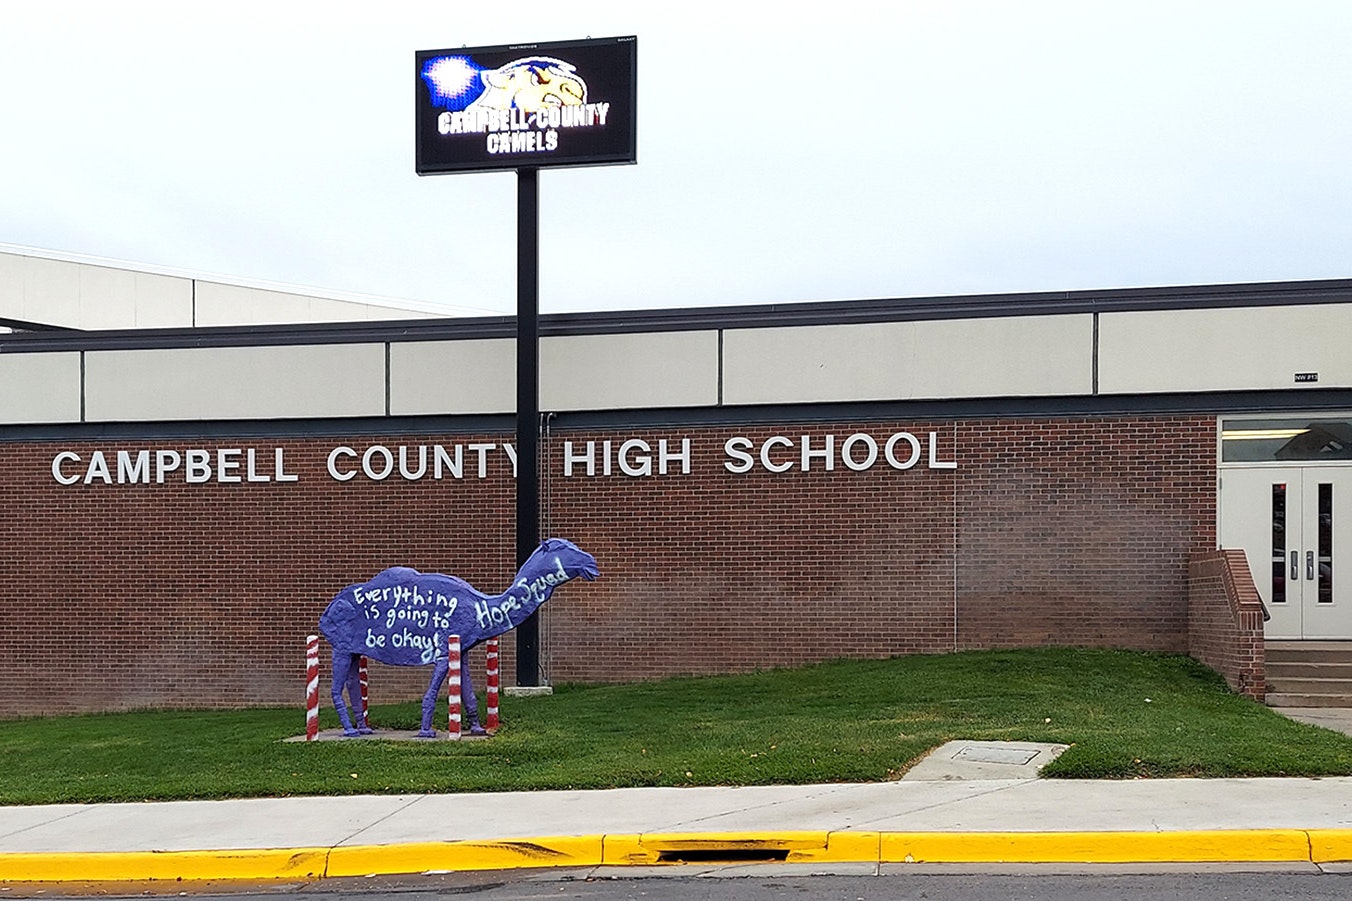 The camel is the mascot for Campbell County High School in Gillette, and the school's "Camel pride" is emphasized with the large camel sculpture in front of the school. Called Humphrey, the sculpture is painted by student classes and clubs multiple times a year, including the Hope Squad.